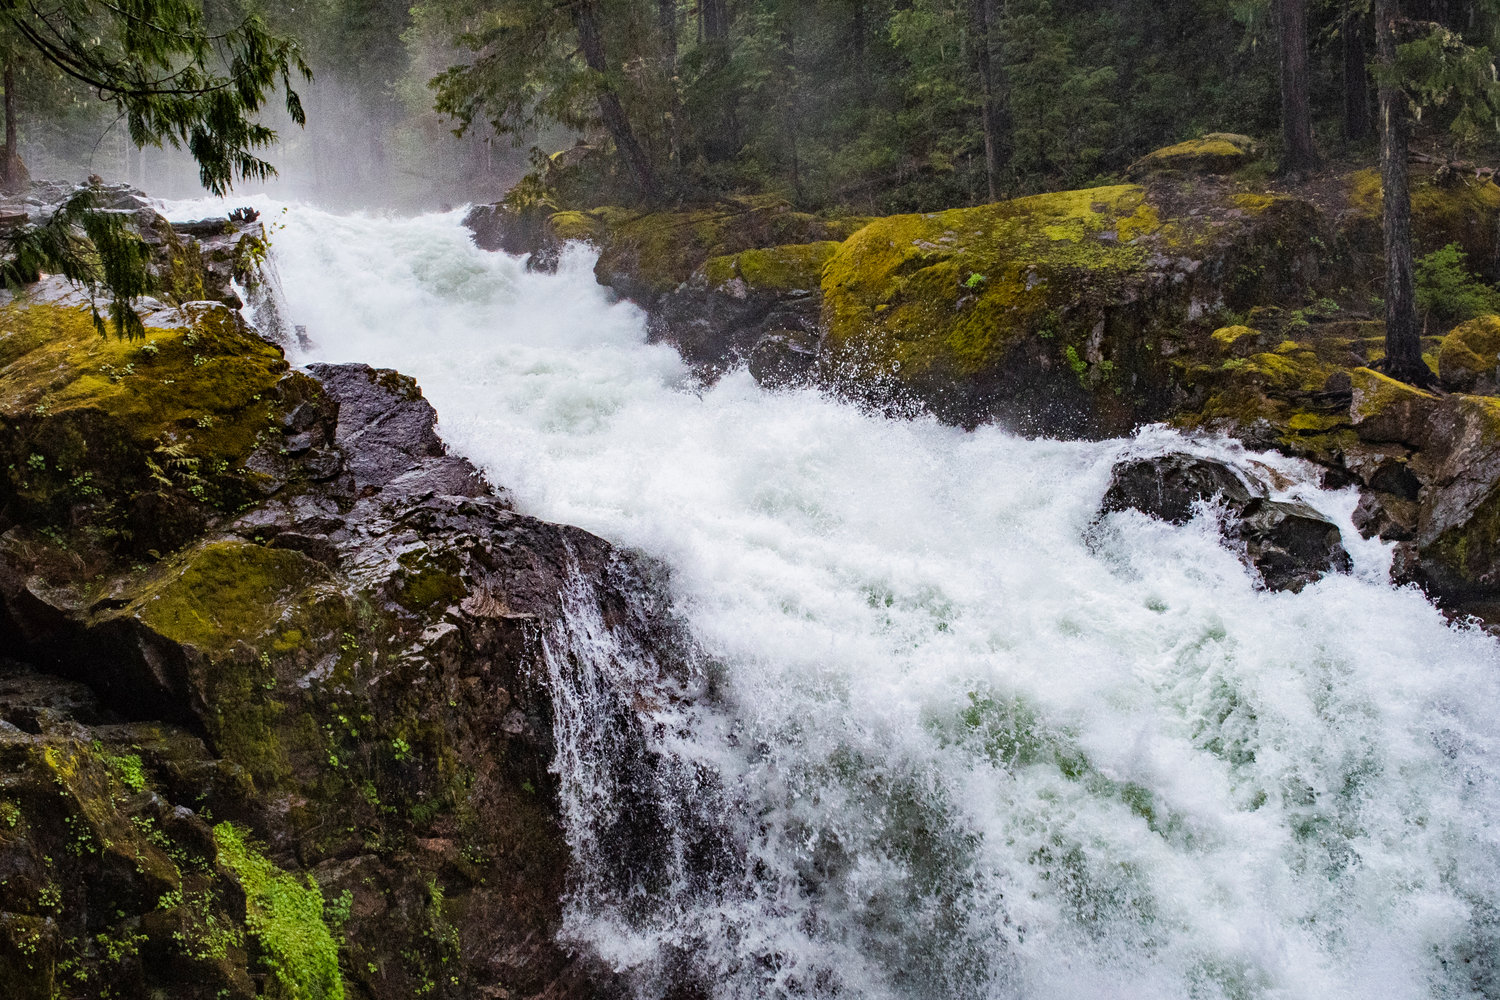 The Ohanapecosh River cascades down the Silver Falls in Mount Rainier National Park on Sunday afternoon.